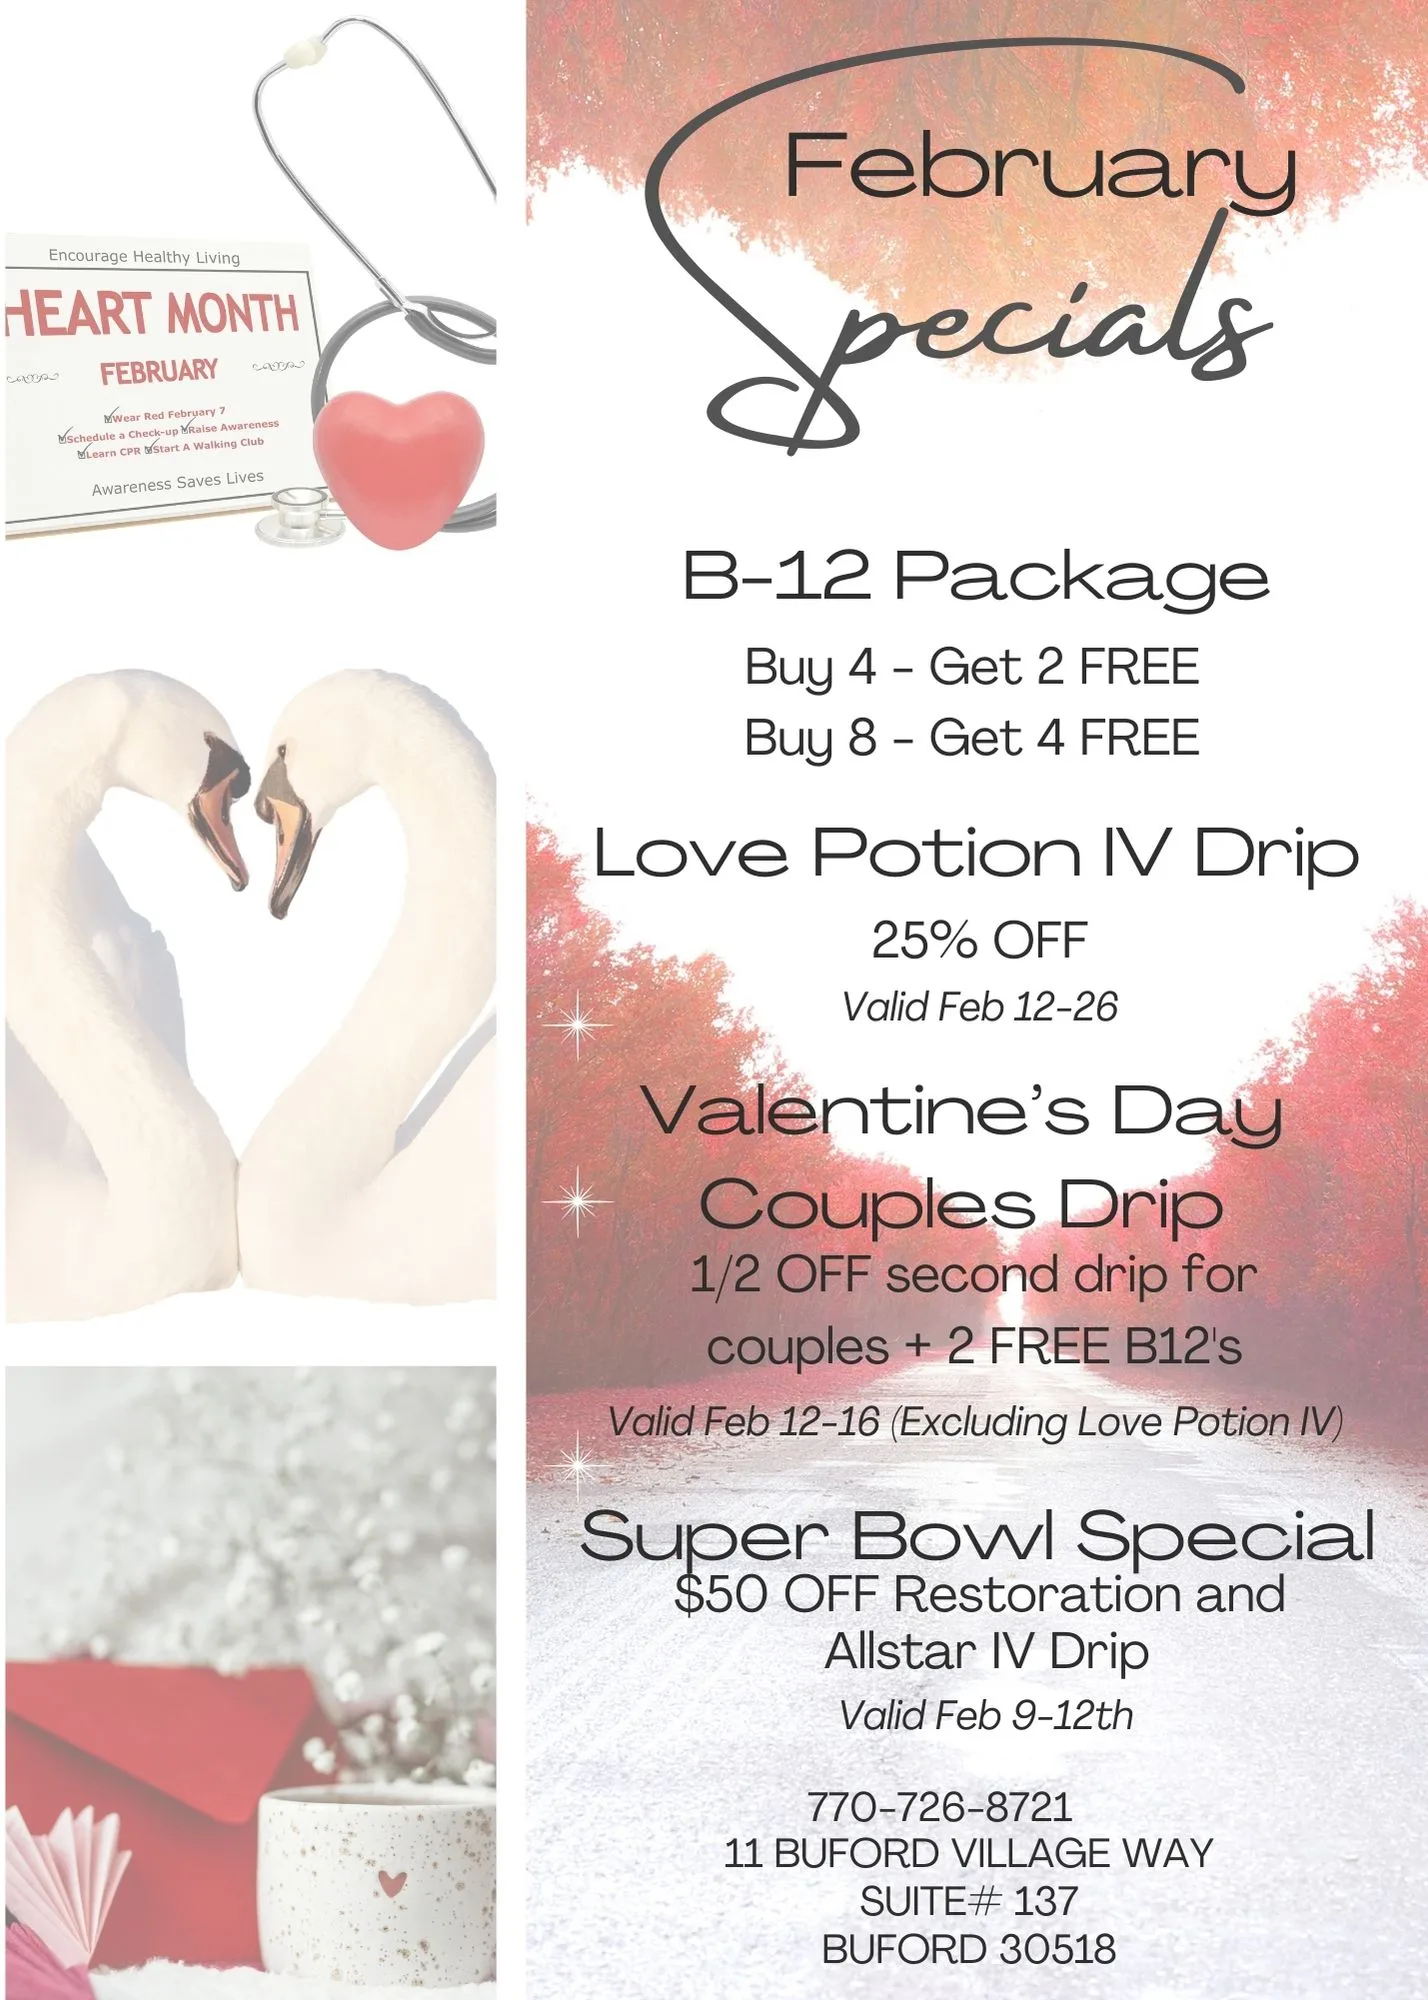 February Specials at Jolie Visage in Buford: Month of Love